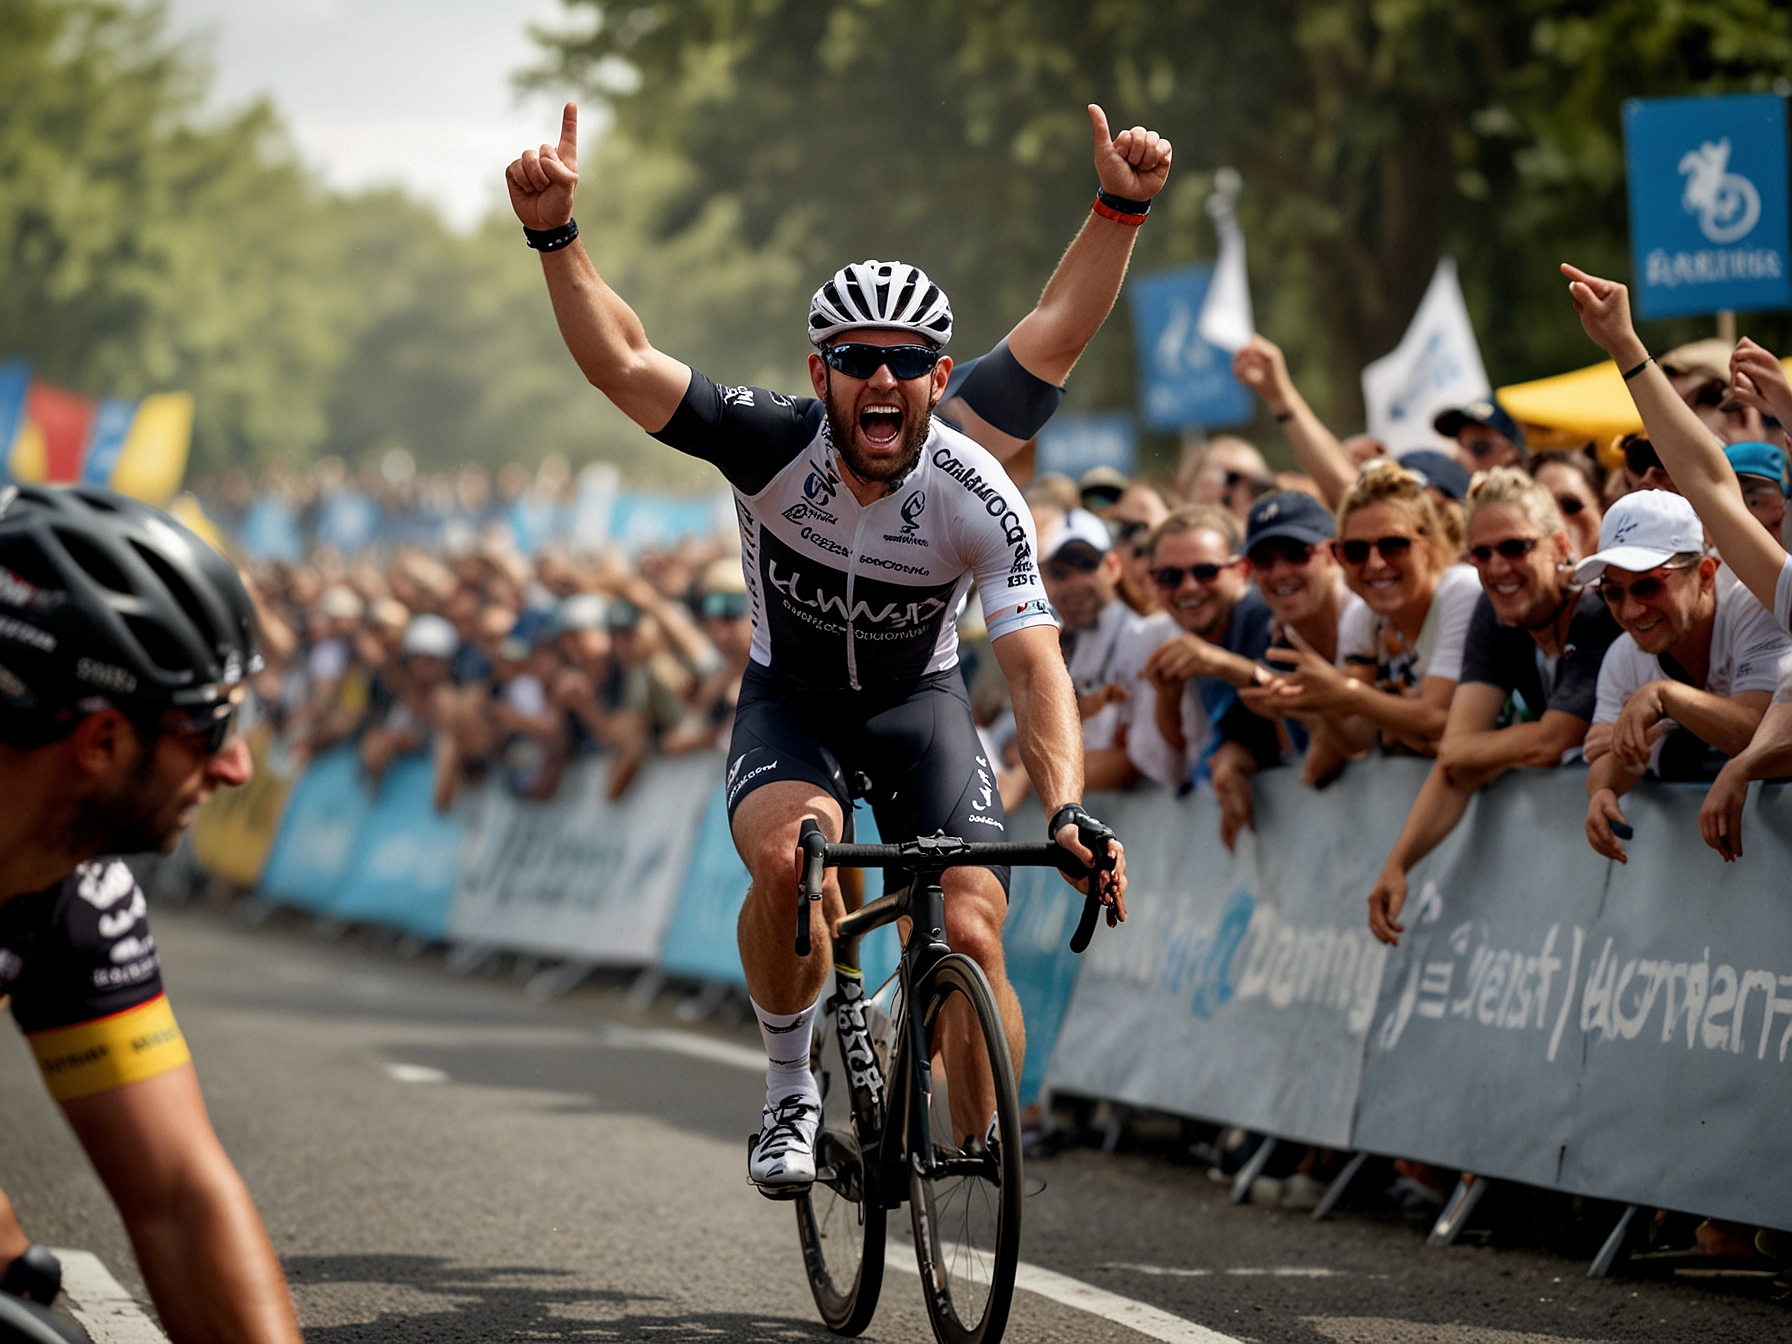 Mark Cavendish, dressed in his team’s cycling gear, crosses the finish line triumphantly, arms raised in victory, while spectators cheer him on during a sprint stage of the Tour de France.